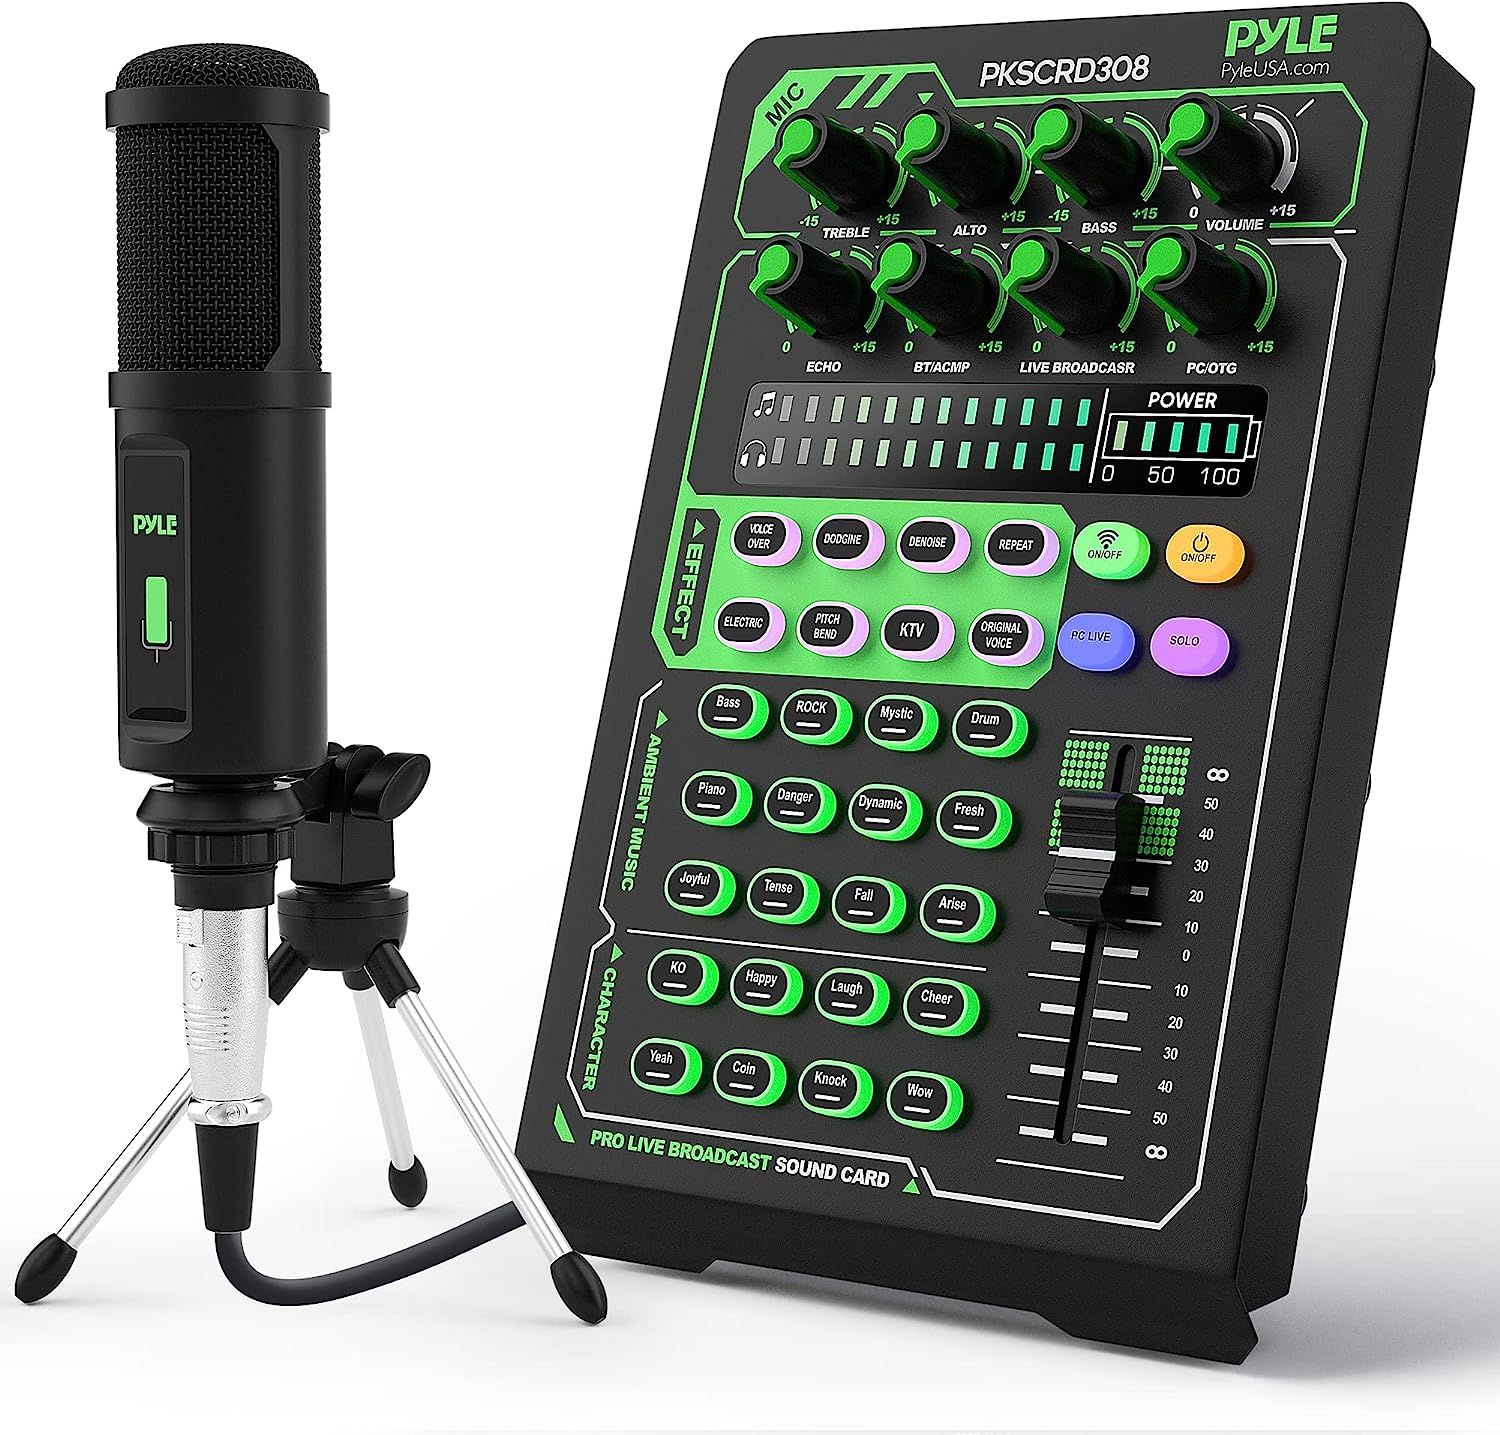 PKSCRD308,　Gaming,　Broadcast　Sounds　w/Microphone　Portable　Ambient　Card　Studio,　for　w/FX,　podcasts　Phone,　Sound　Audio　PC,　Interface　Speakers　Streaming　Pro　Set,　Condenser　mixer　Recording　Live　Bluetooth　Pyle　Soundbars,　DJ　Audio,